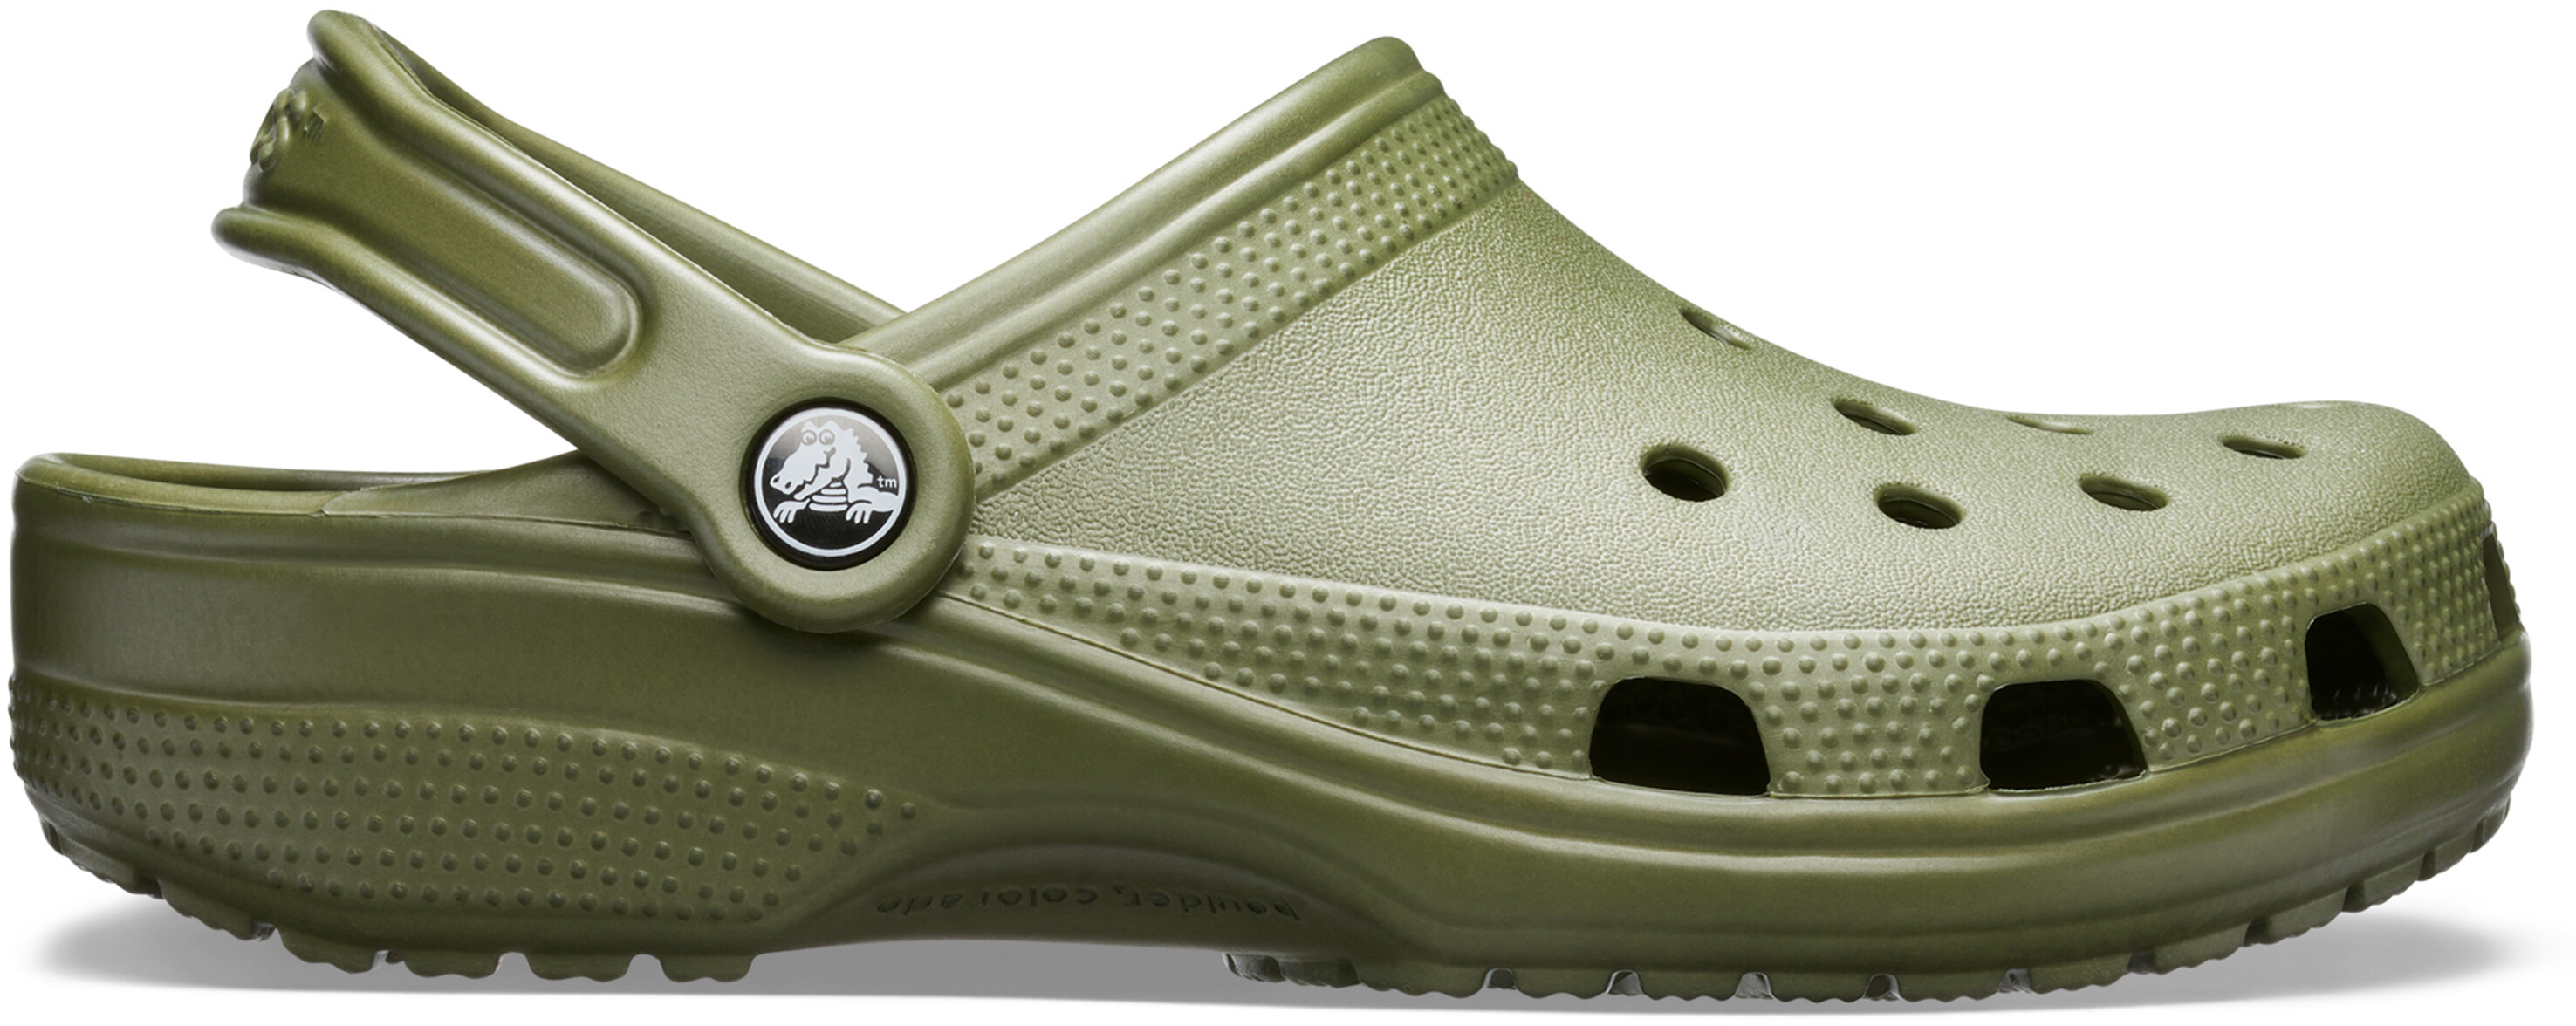 Crocs Classic Clogs army green at addnature.co.uk